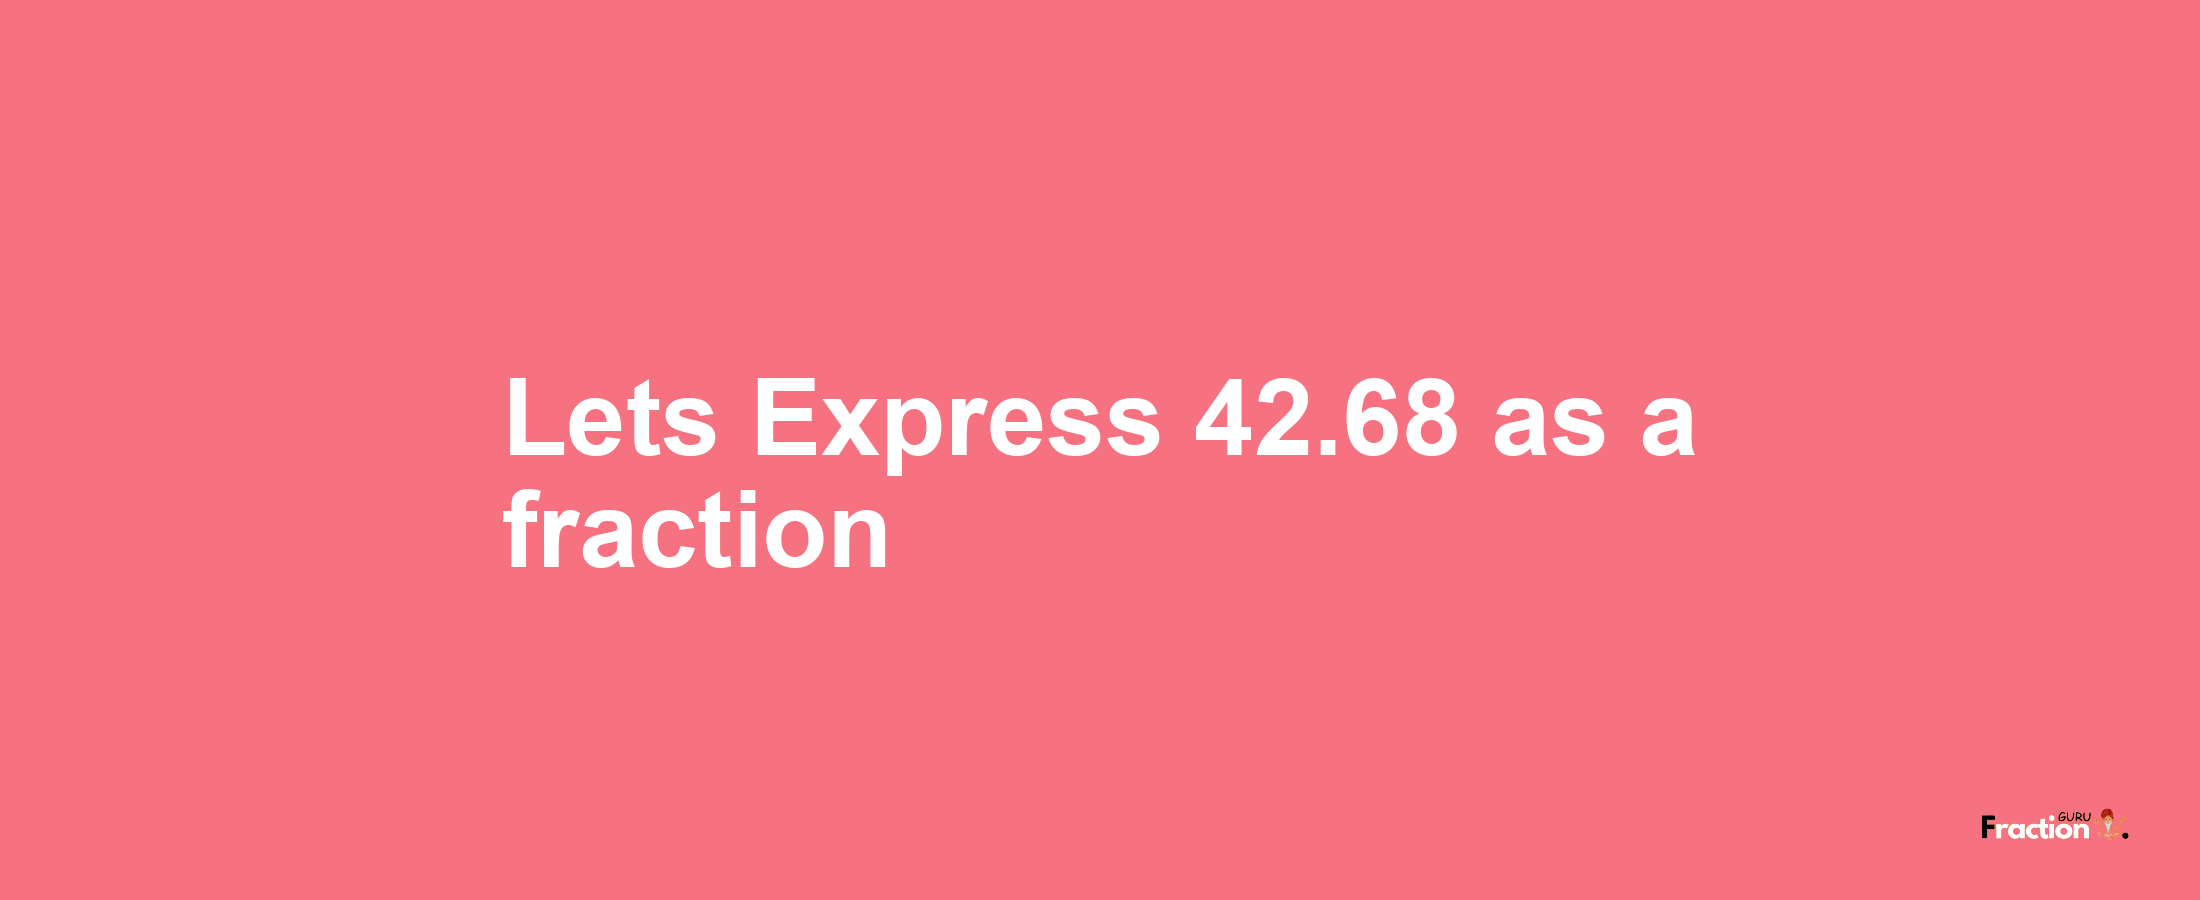 Lets Express 42.68 as afraction